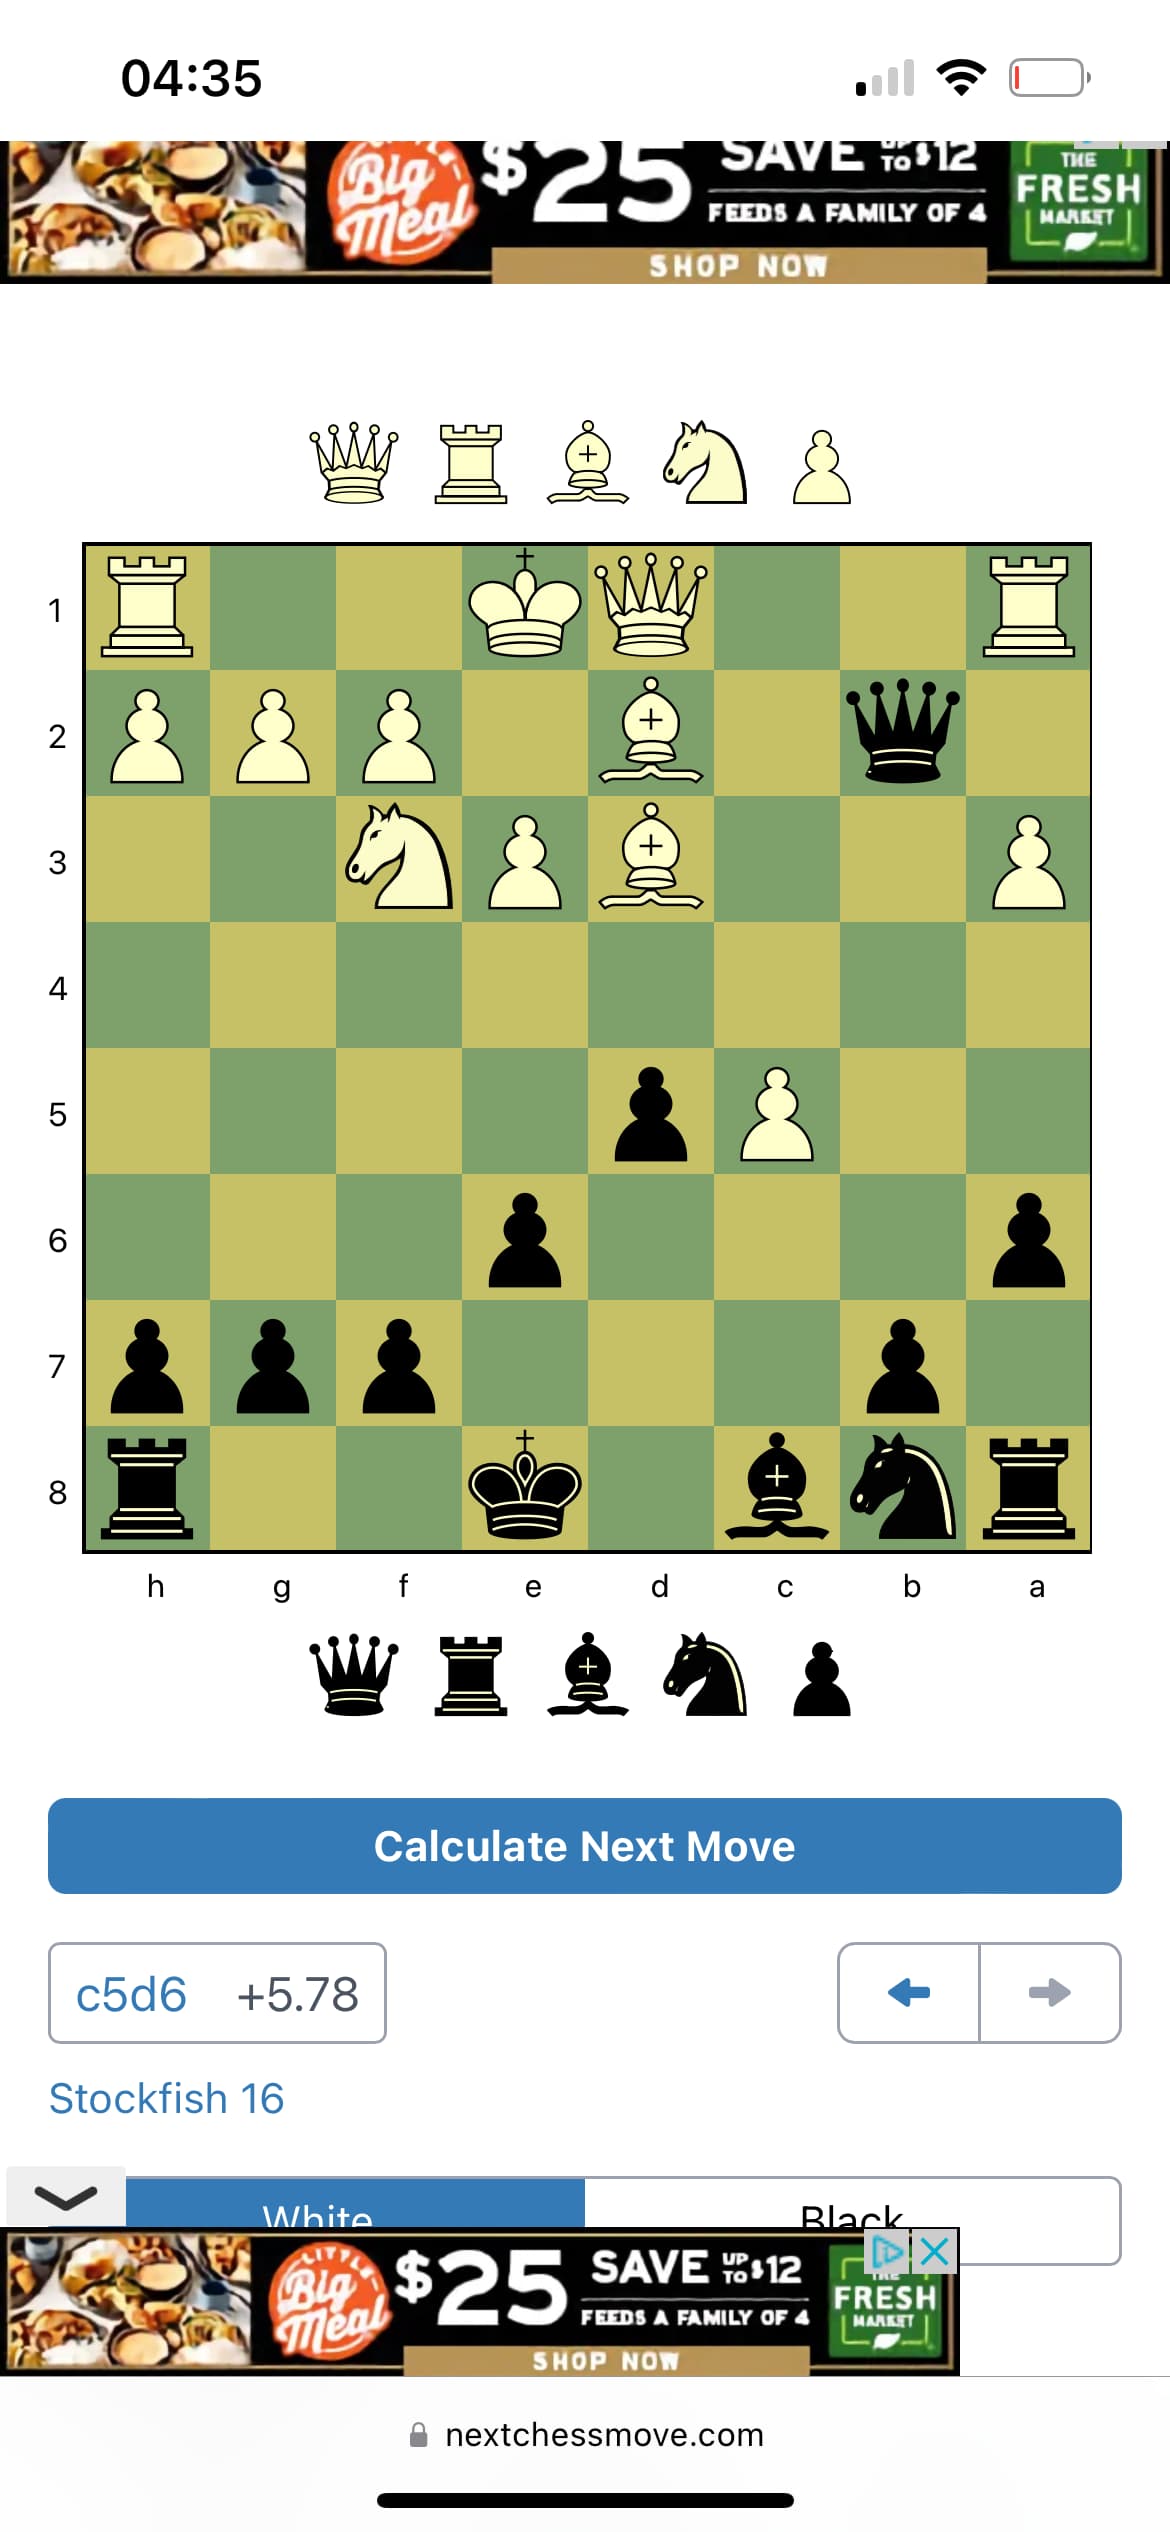 chess wizard on Instagram: Why Stockfish Consider This move as BRILLIANT  !!! . . . . . . . . #chess #chessiesofinstagram #chessgame #chessmoves oves  #chessplayer #chessboard #chesse #chessmoves #chesstactics #chessecake  #chessmaster #